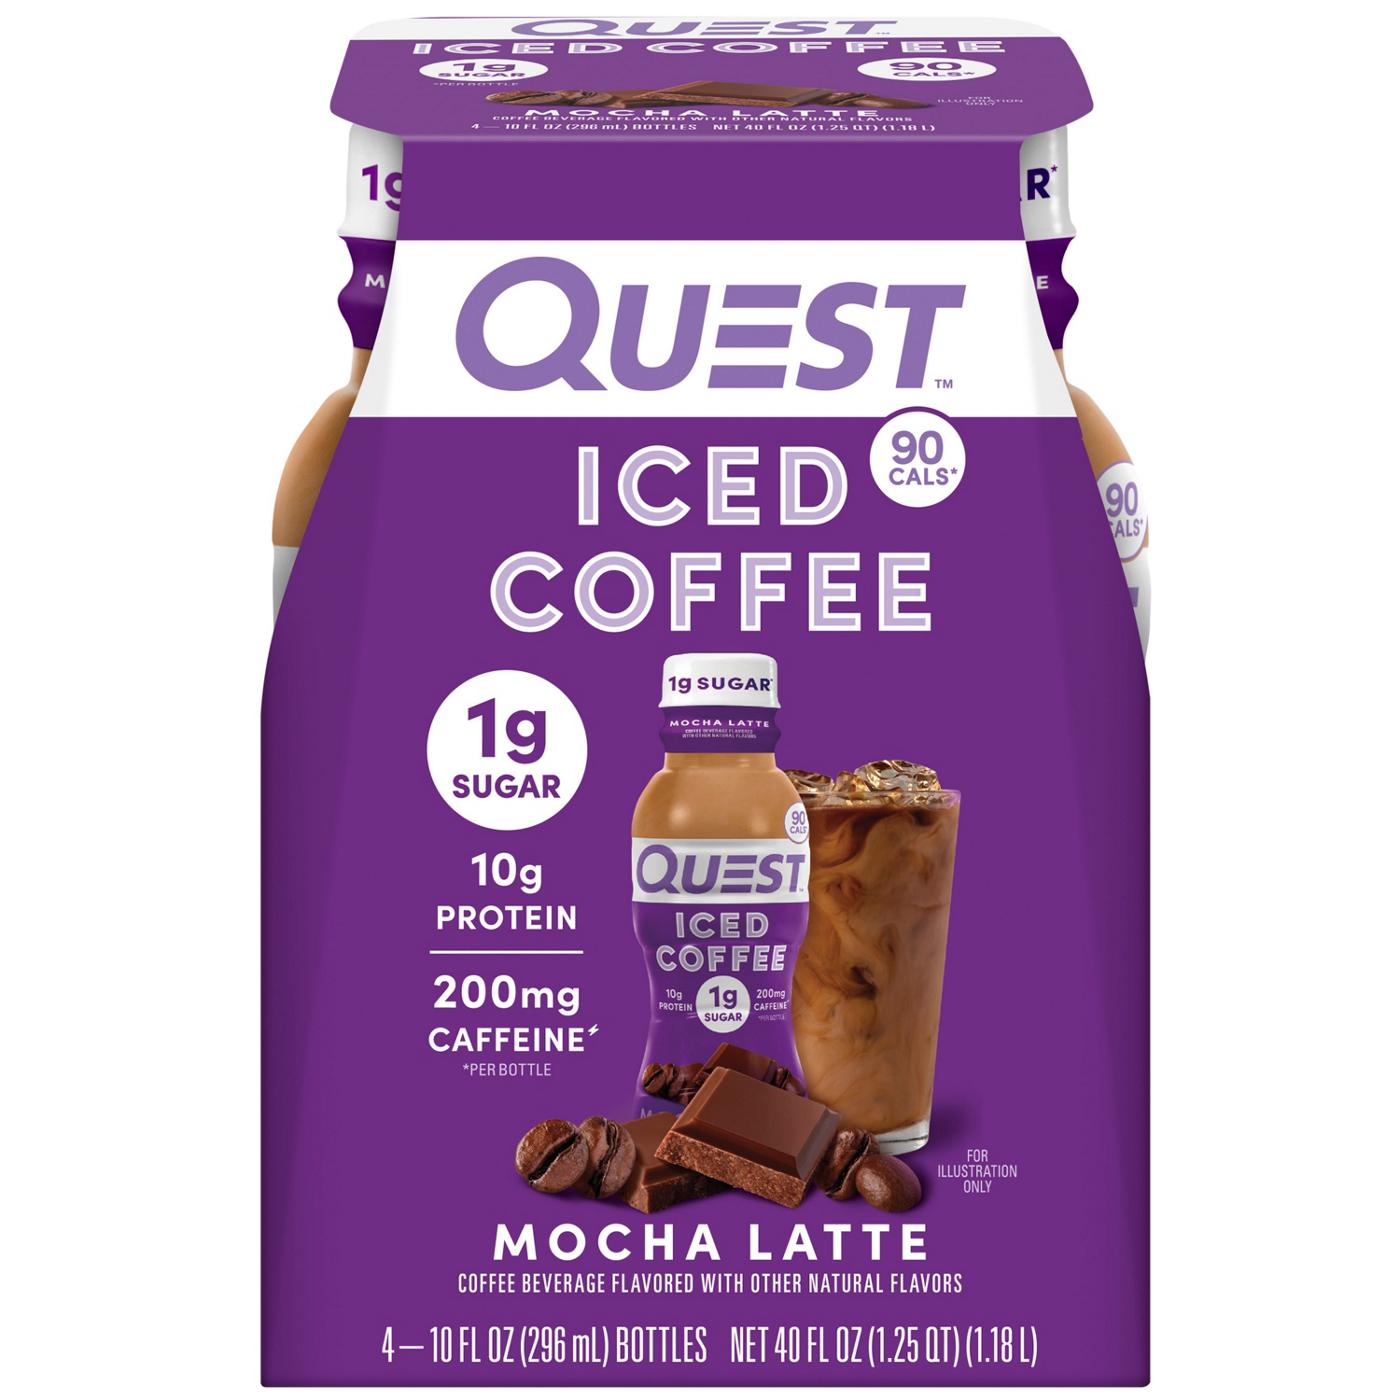 Quest Iced Coffee Protein Drink - Mocha Latte - Shop Diet & Fitness at ...